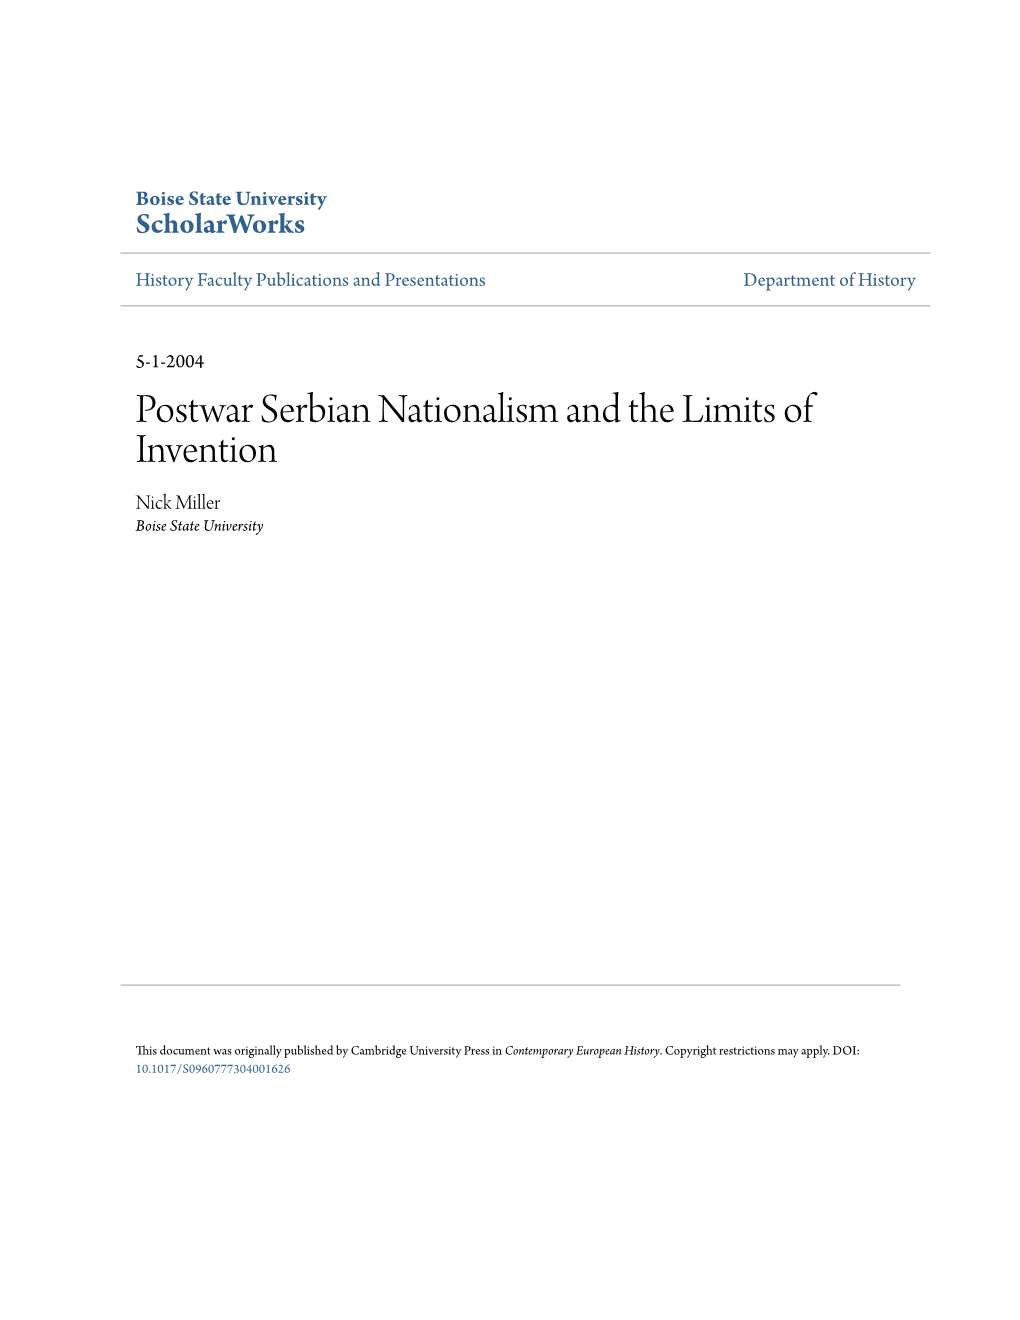 Postwar Serbian Nationalism and the Limits of Invention Nick Miller Boise State University